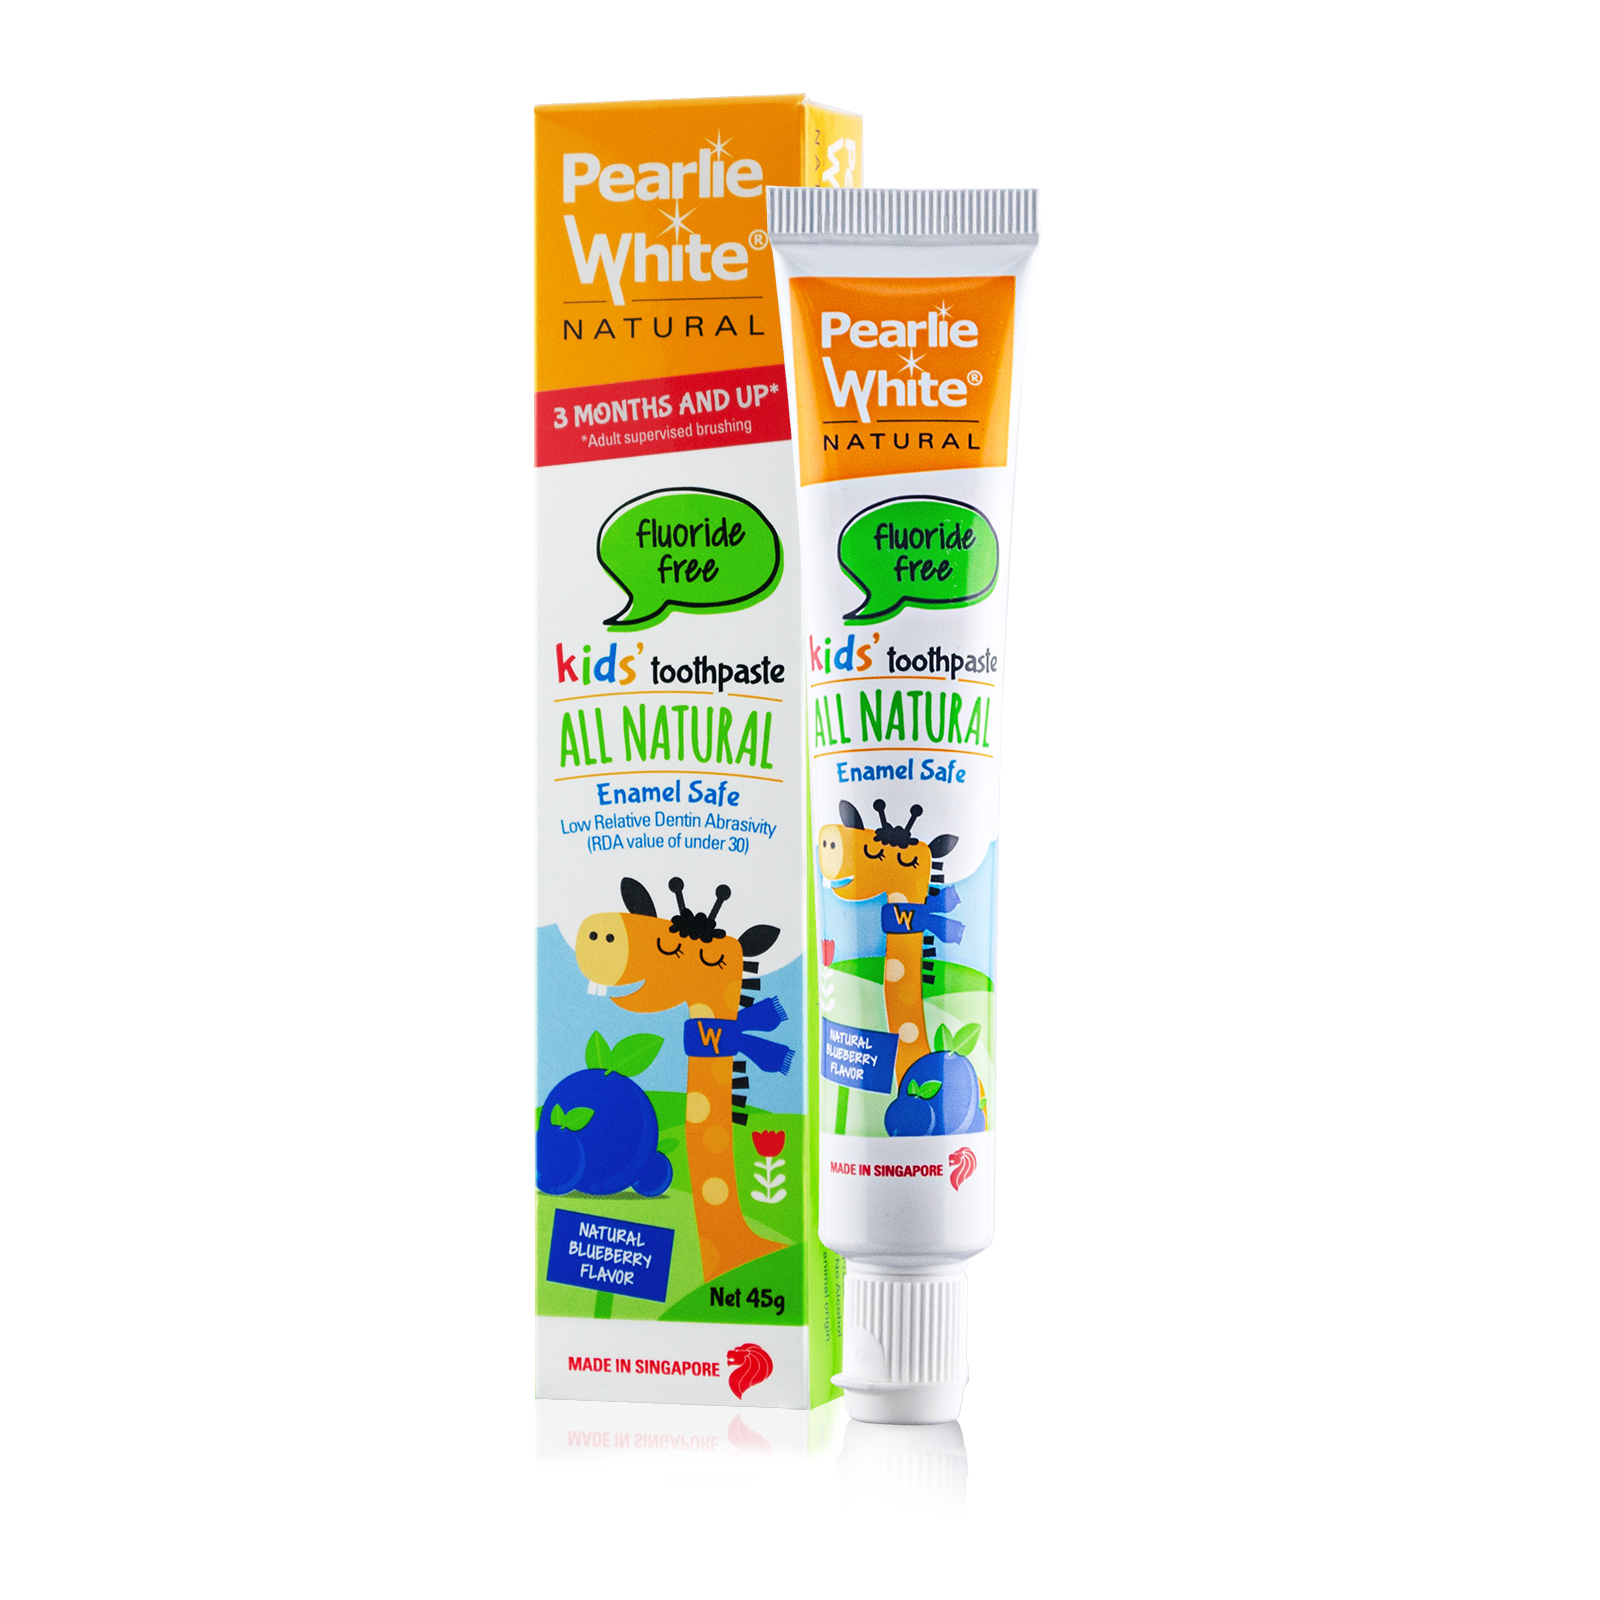 baby-fair Pearlie White All Natural Enamel Safe Kids Blueberry Toothpaste (Fluoride Free) 45g